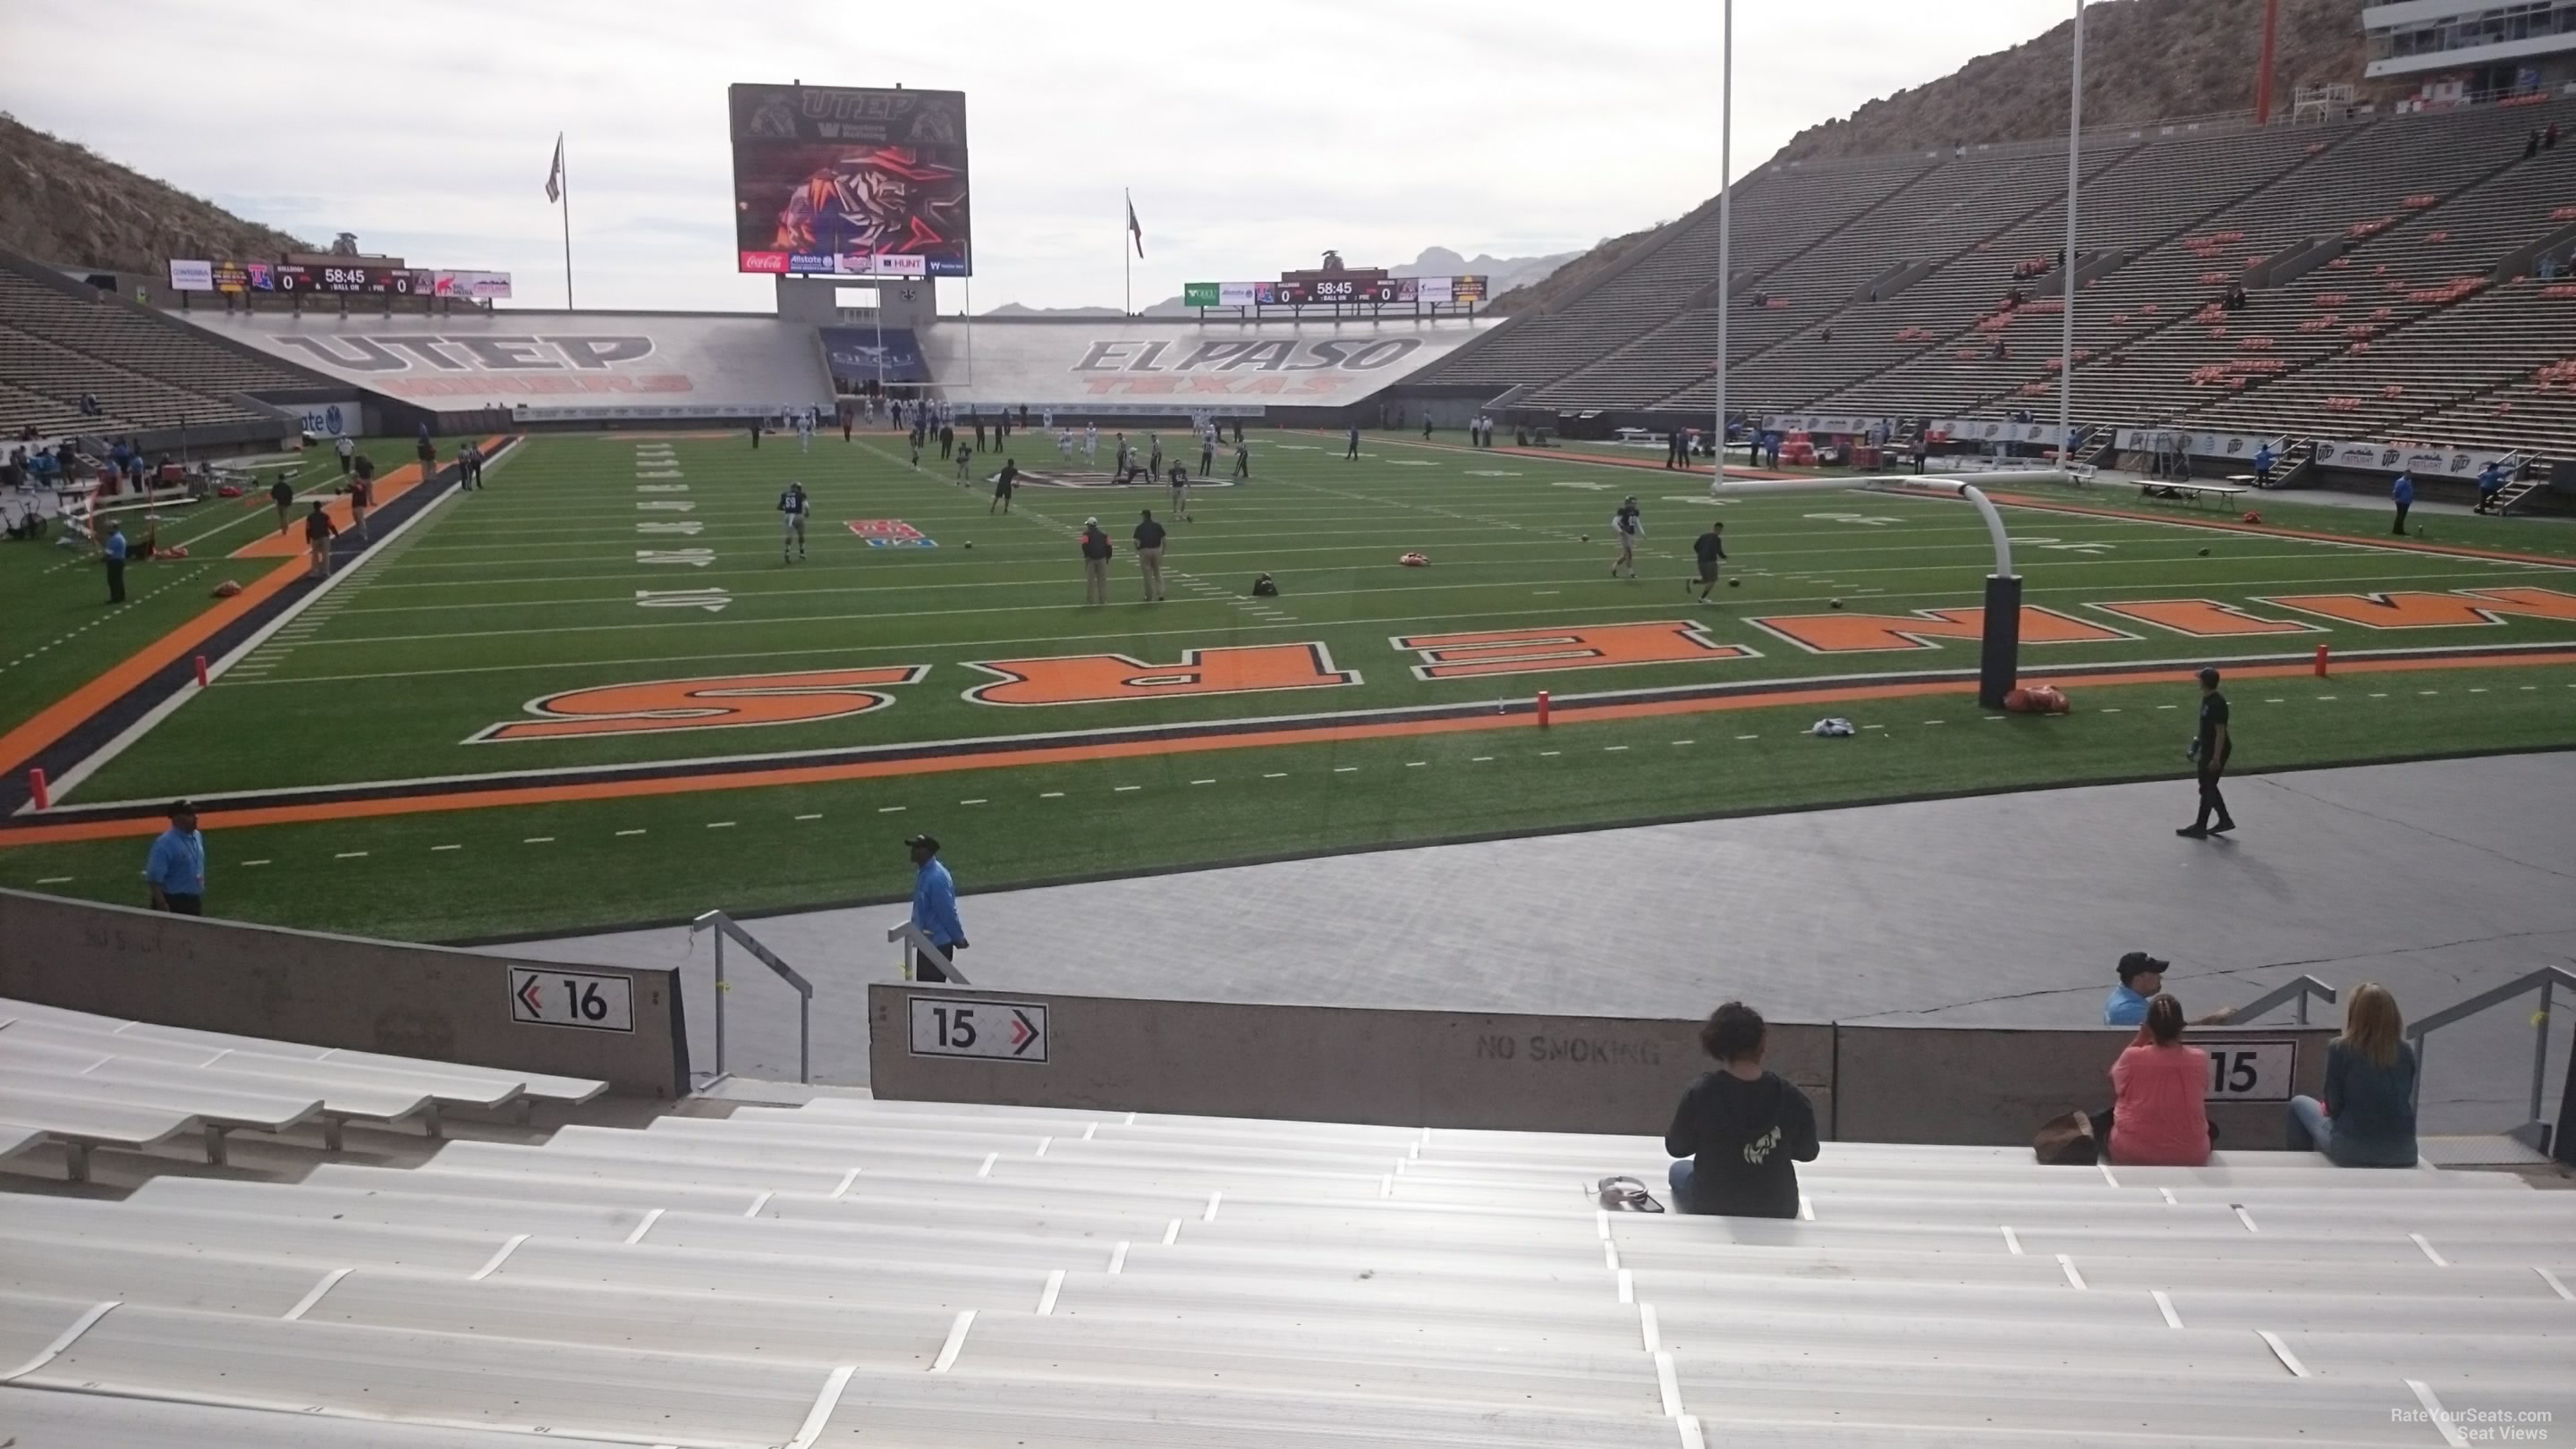 section 15, row 15 seat view  for football - sun bowl